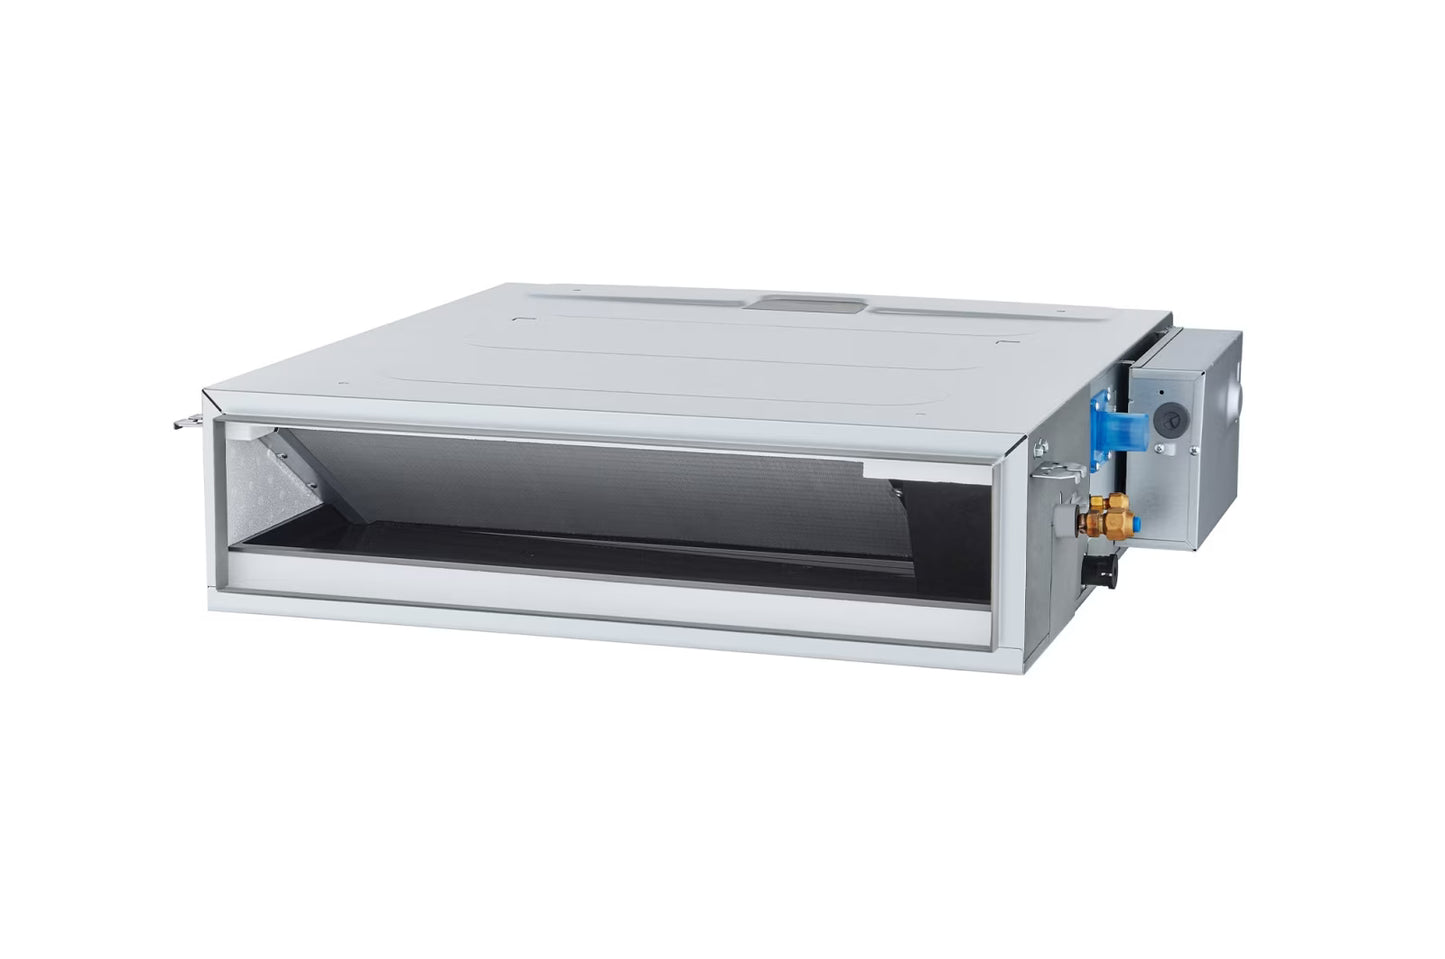 LG Ceiling Concealed Duct Unit 2.8KW with Low Static and E.S.P. Control for Multiple Rooms - ARNU09GL1G4